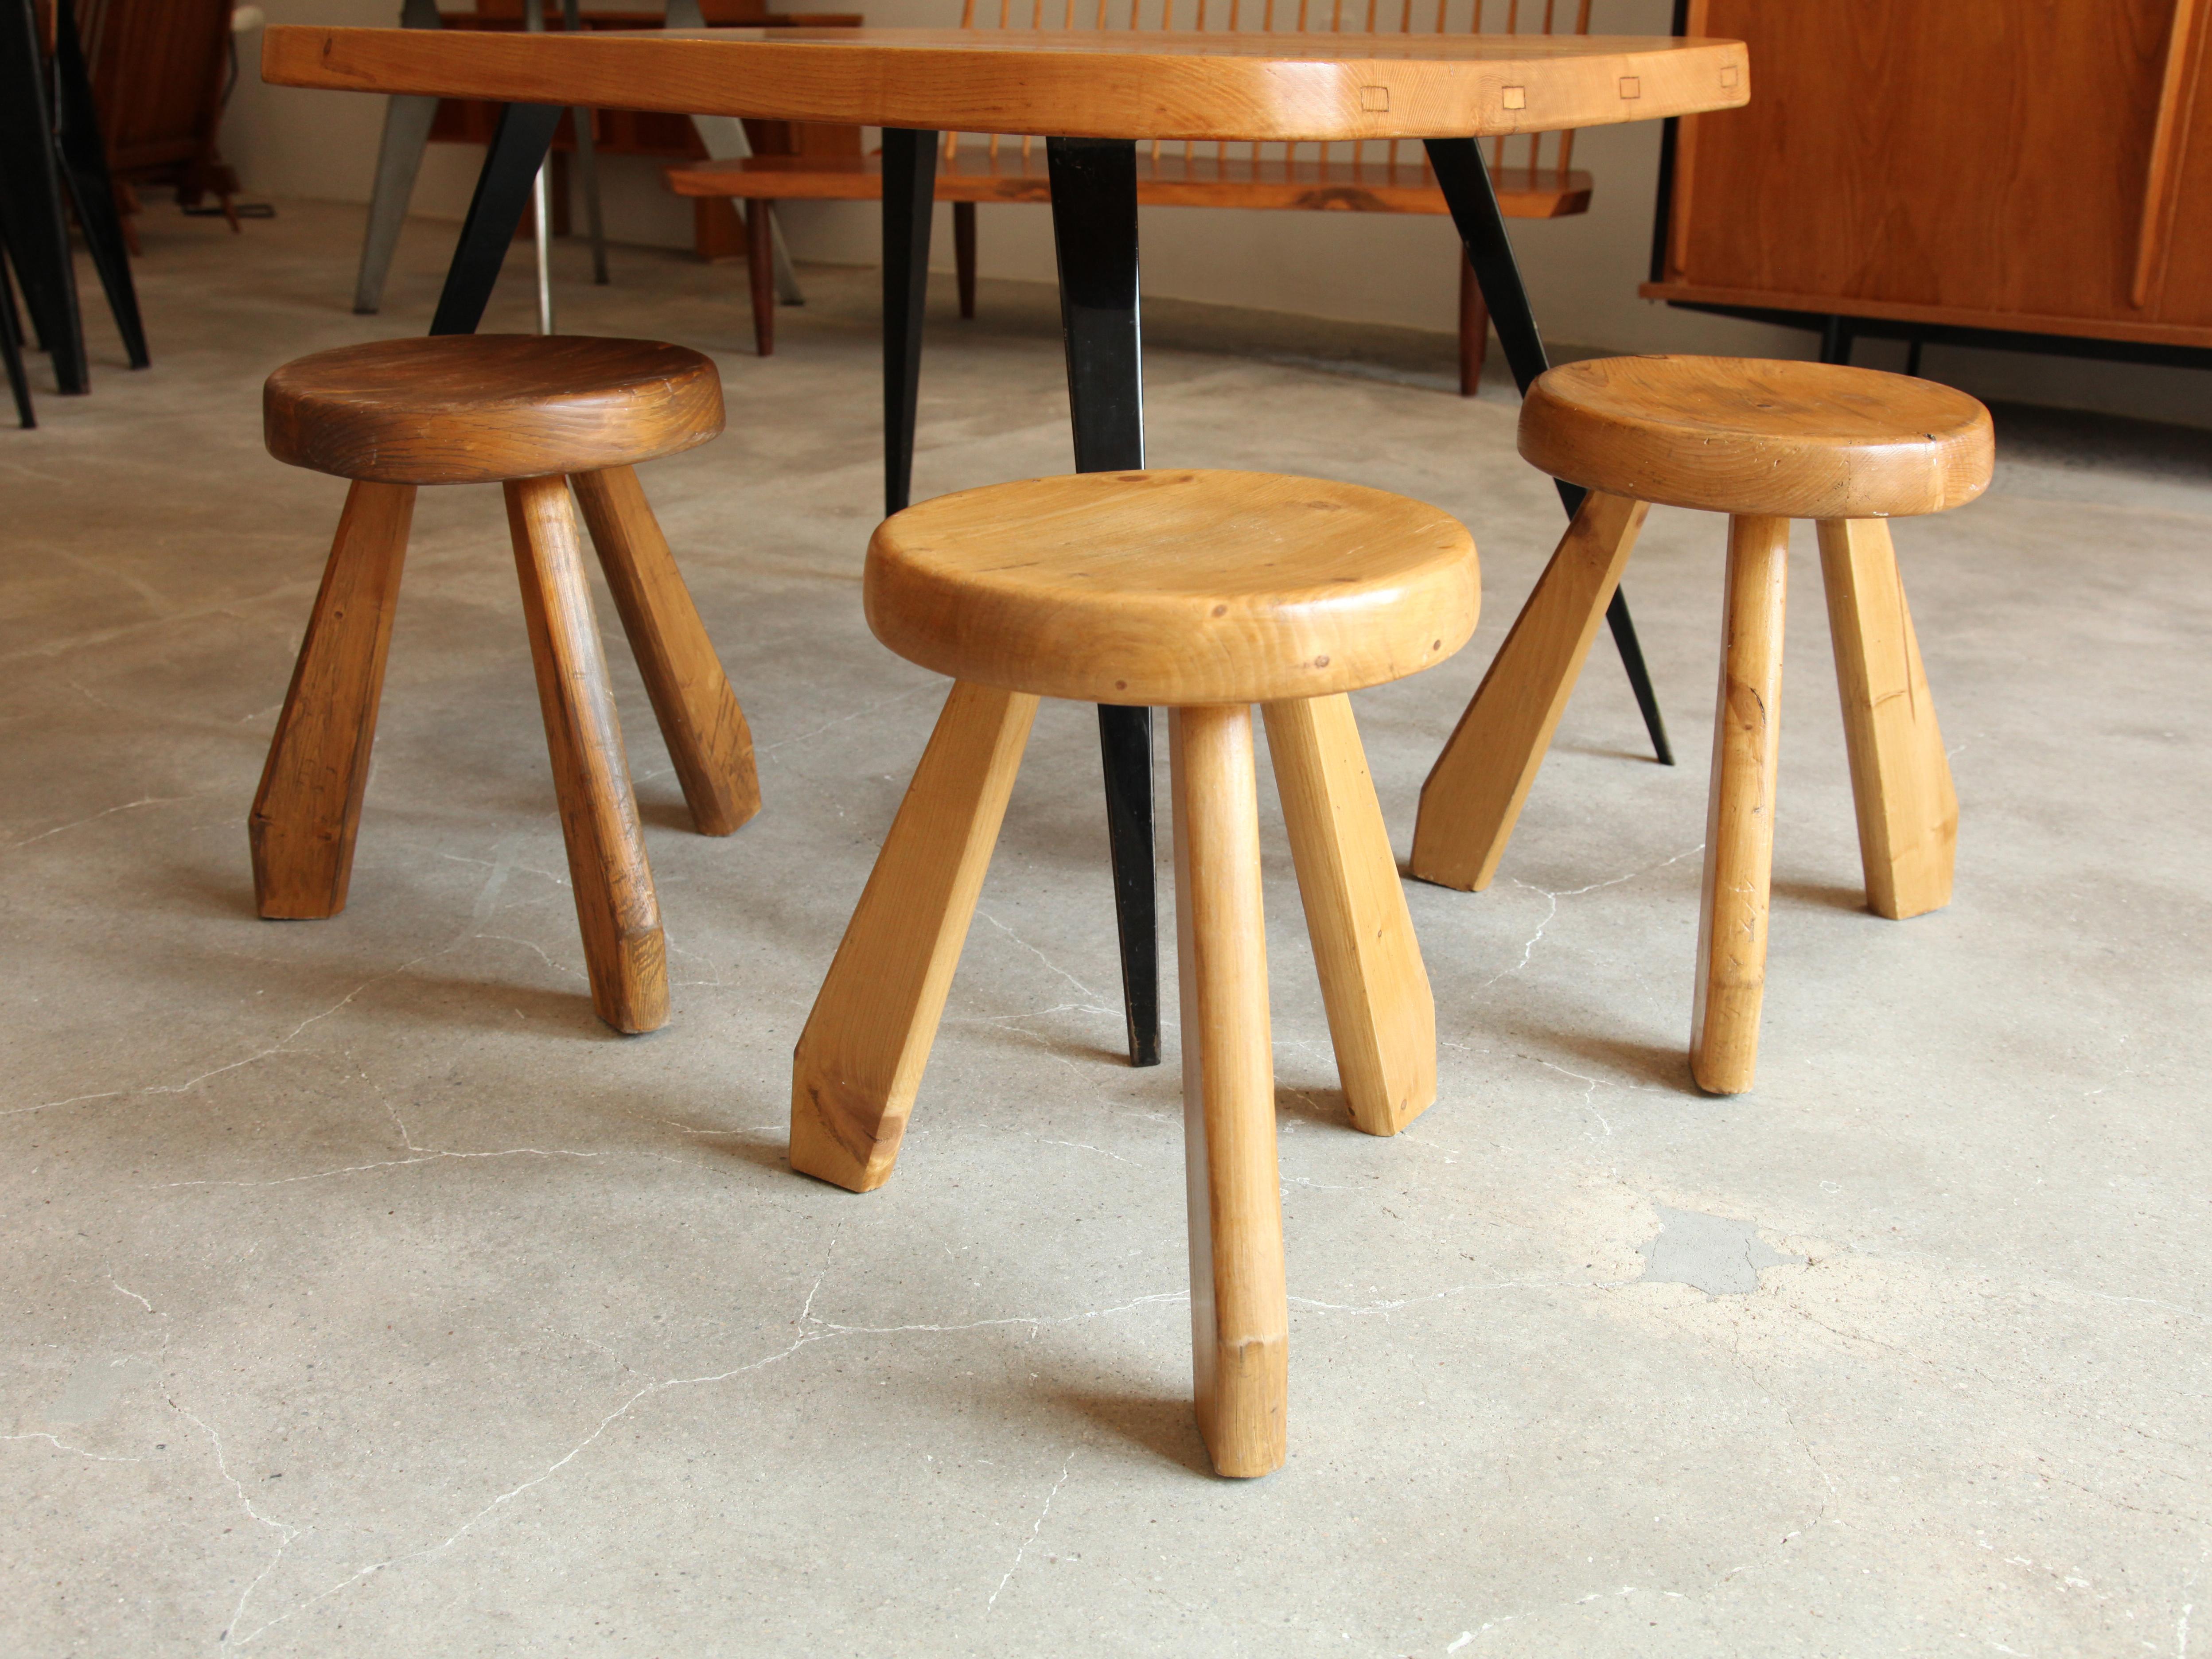 Great grouping of three pine stools by Charlotte Perriand from Les Arcs Ski Resort in Savoie, France, c. 1968. Sold as grouping of 3. Price is per stool. Will consider splitting up grouping.